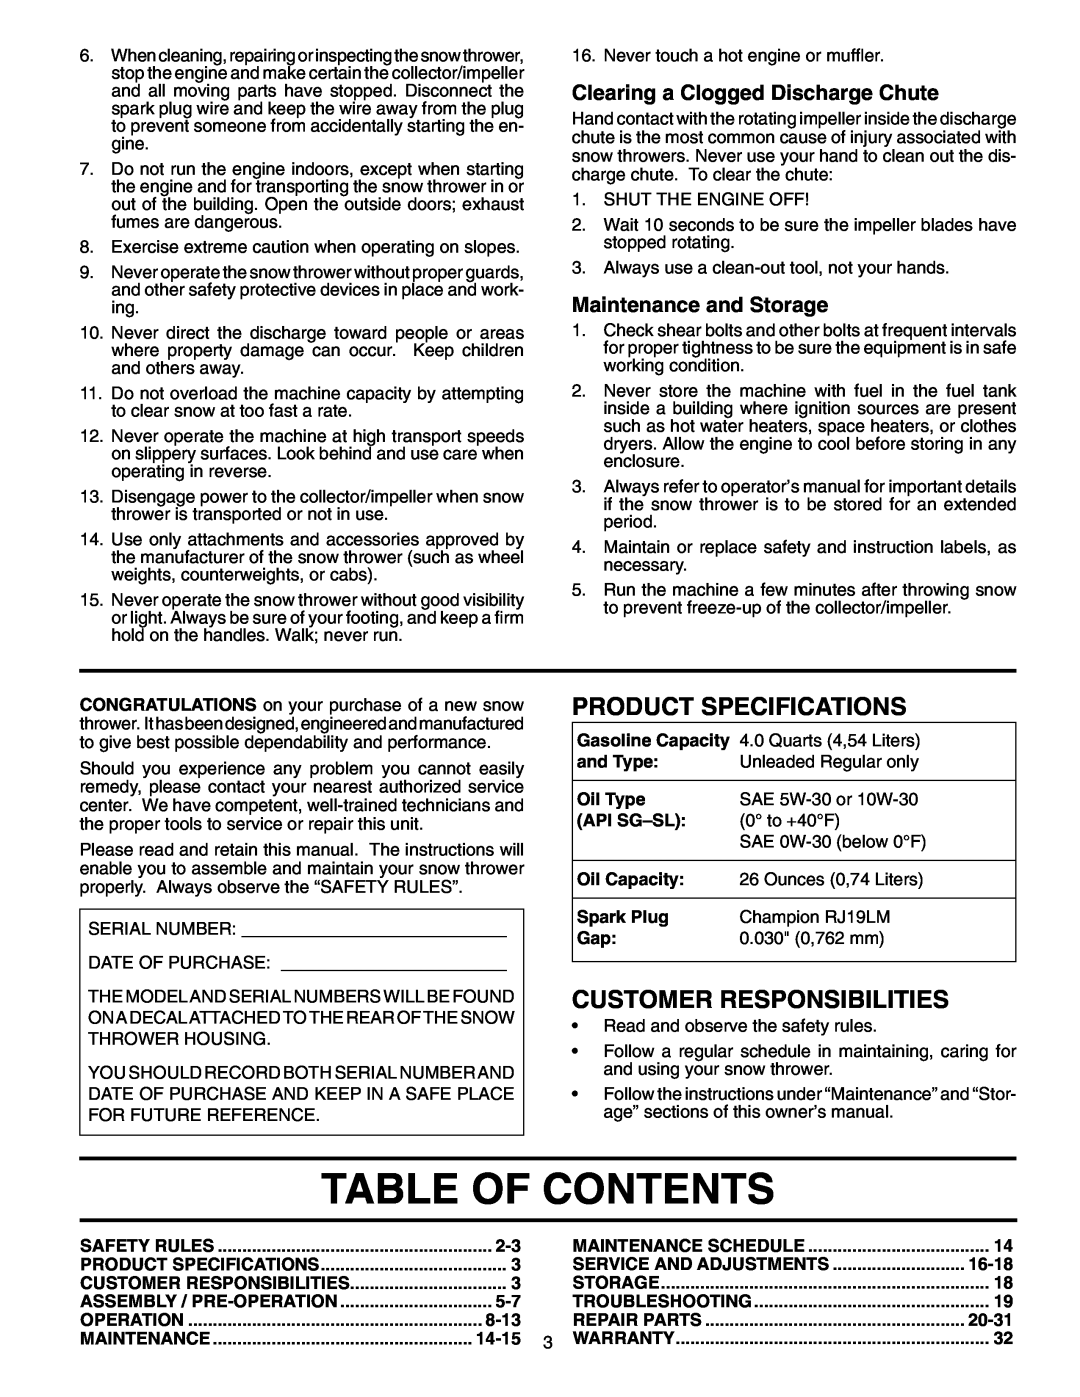 Poulan 407885 Table Of Contents, Product Specifications, Customer Responsibilities, Clearing a Clogged Discharge Chute 